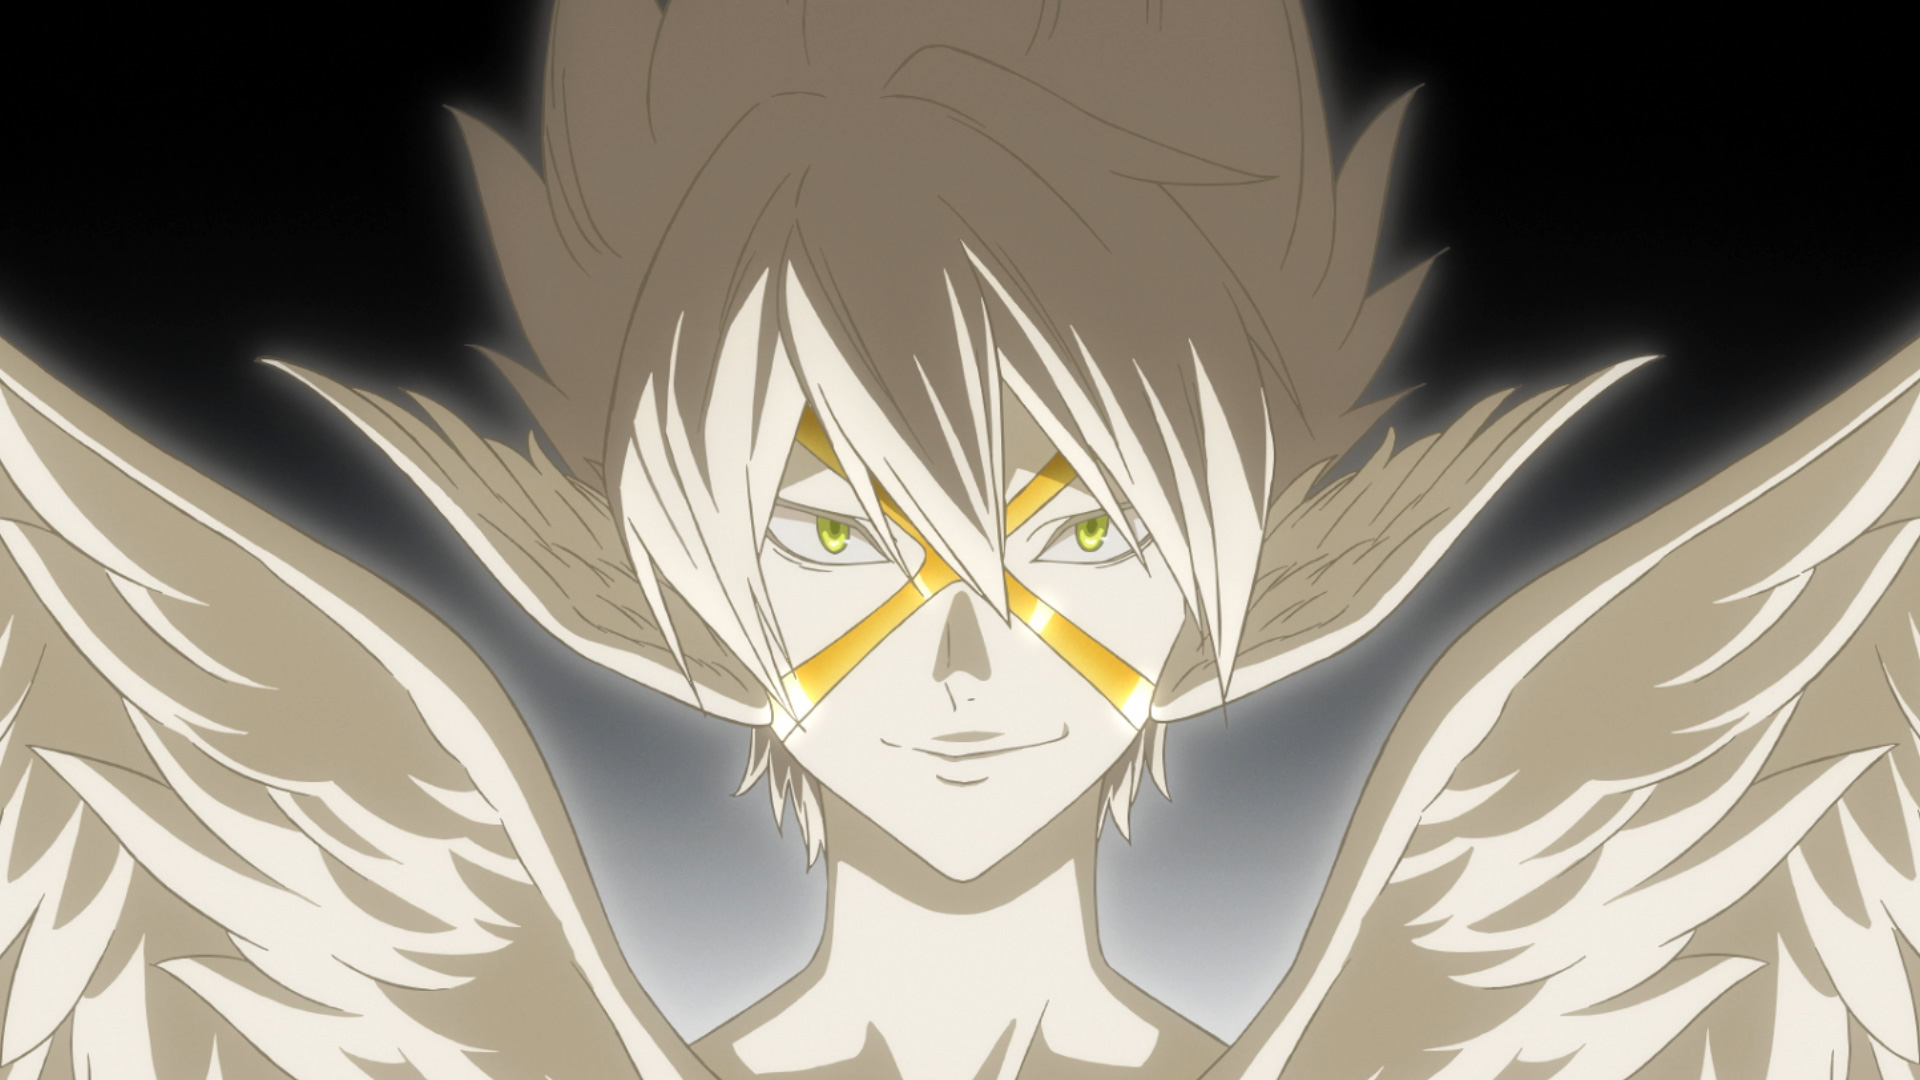 Crunchyroll - Check Out the Platinum End TV Anime's New Non-Credit OP / ED